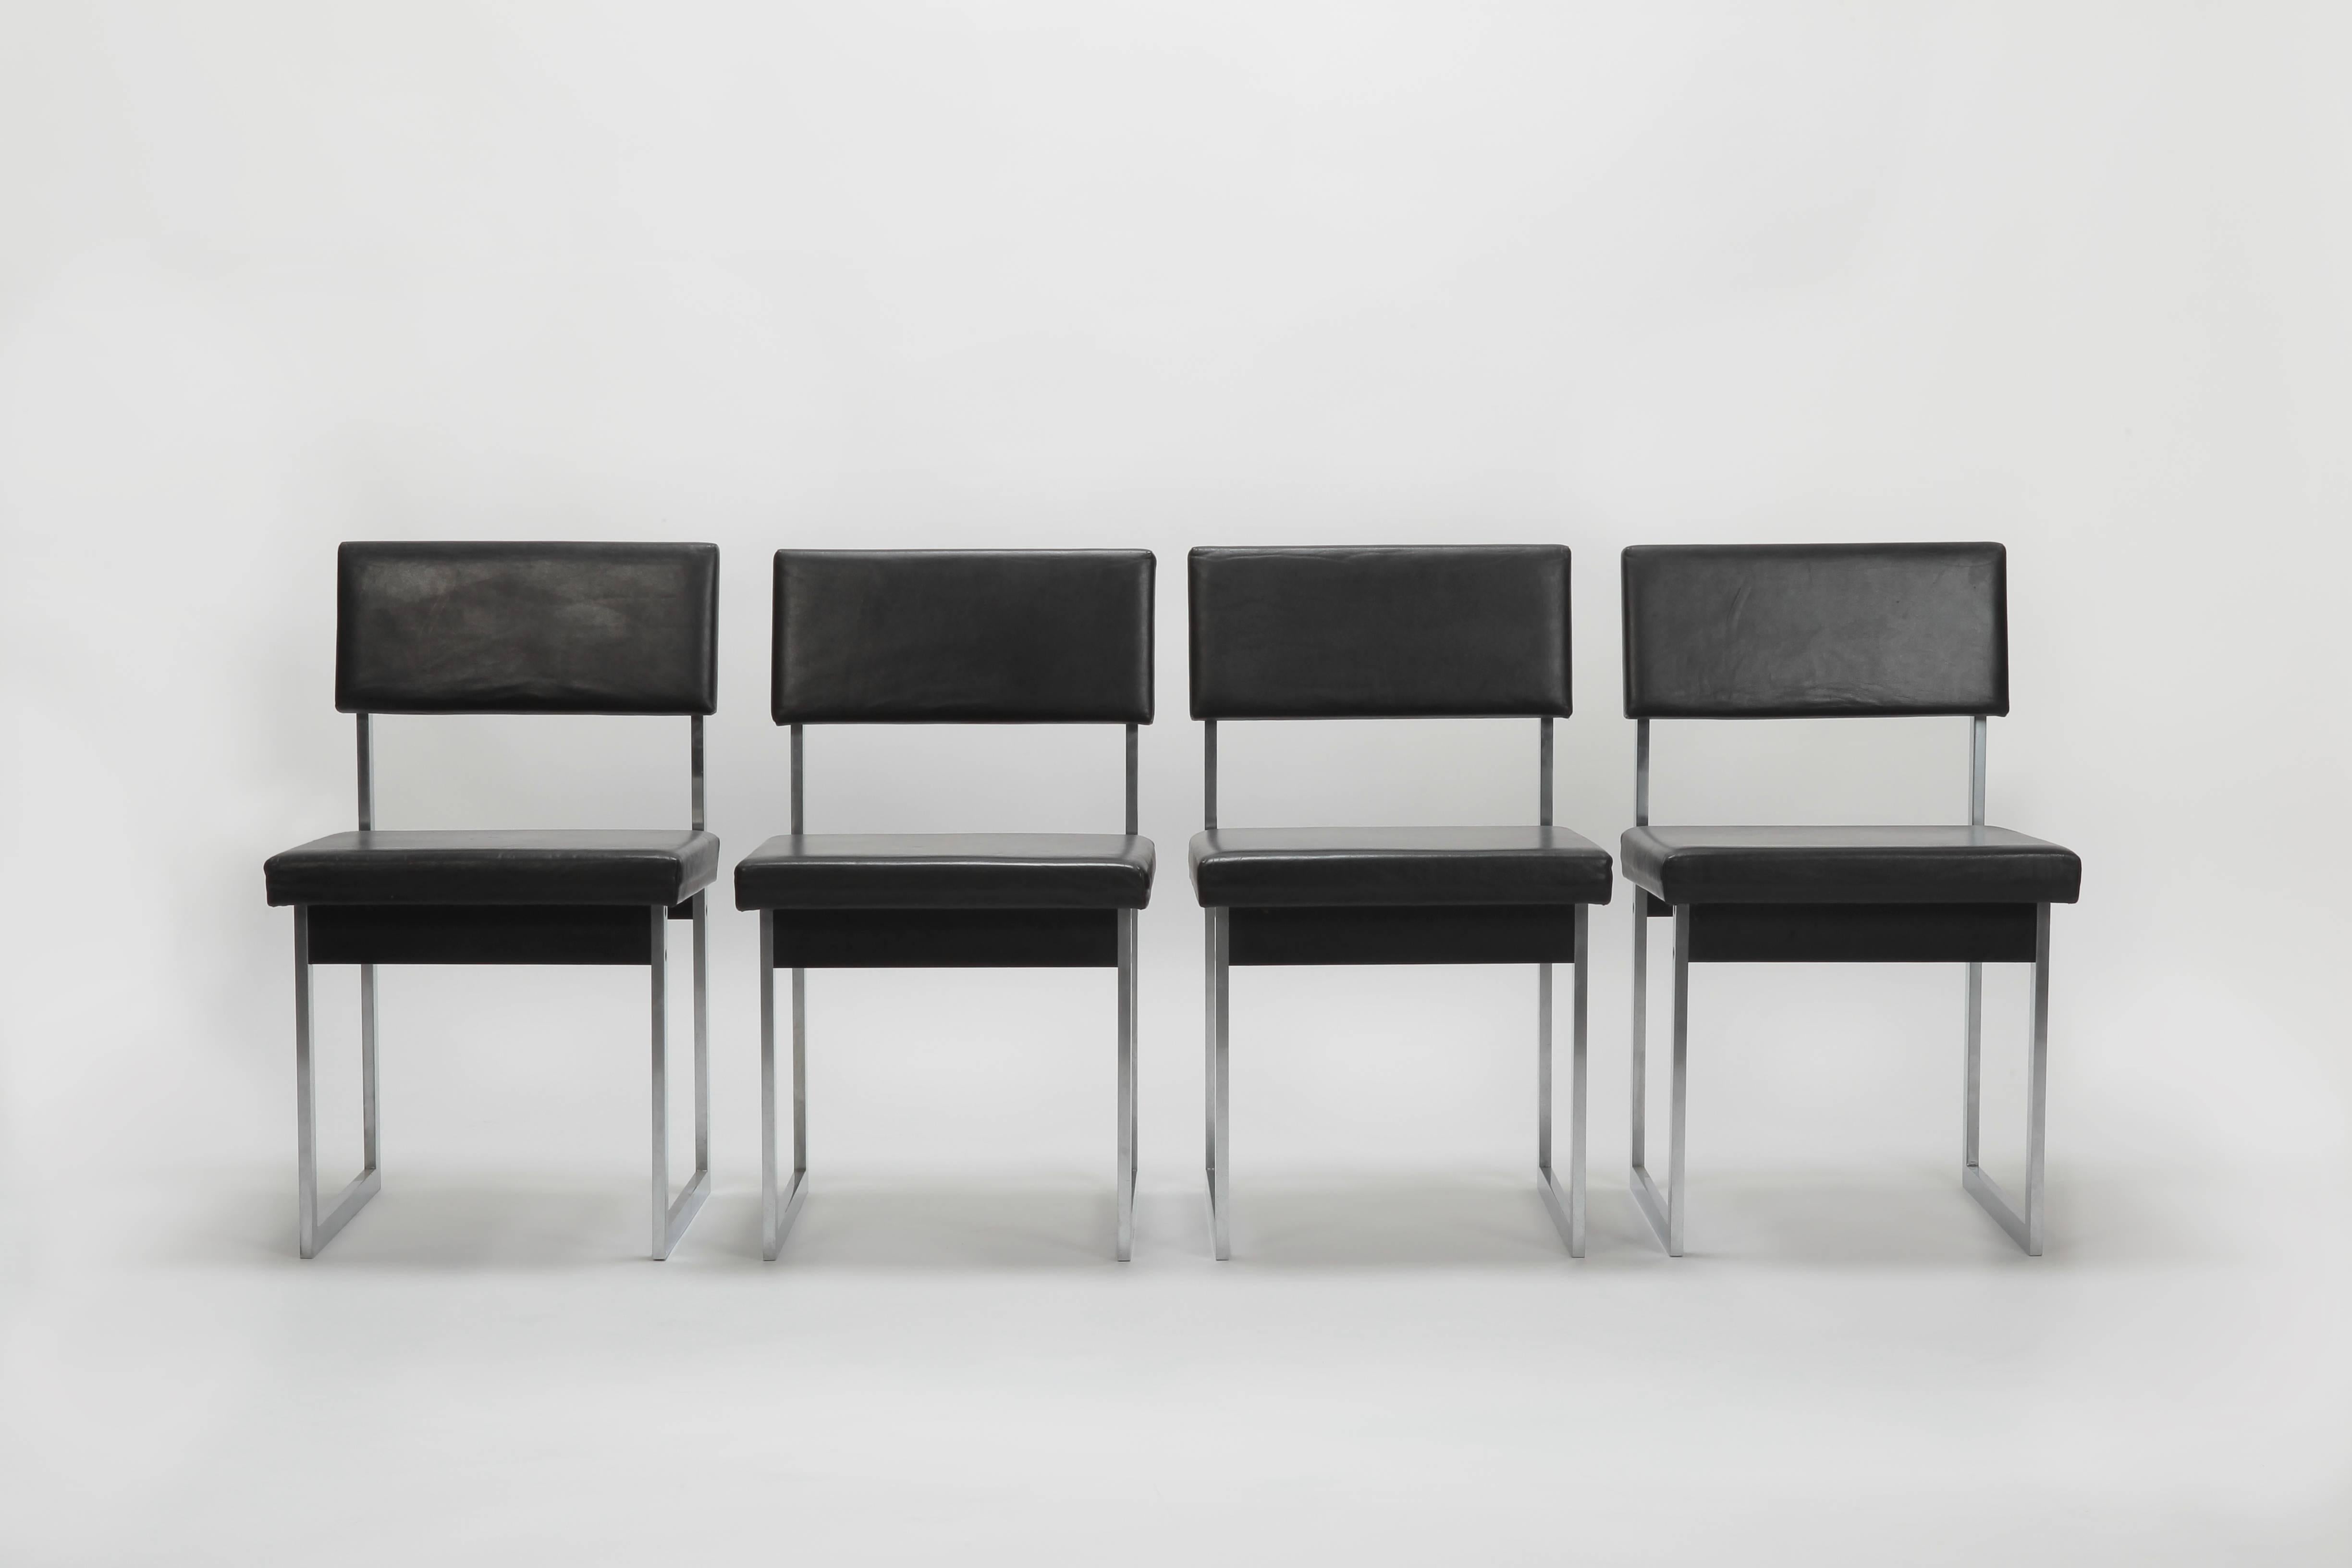 Four Swiss steel chairs manufactured in the 1960s. The chair are in the style of George Nelson. Cleanly processed rectangular steel tubing, seat and back rest are covered with very soft black leather.